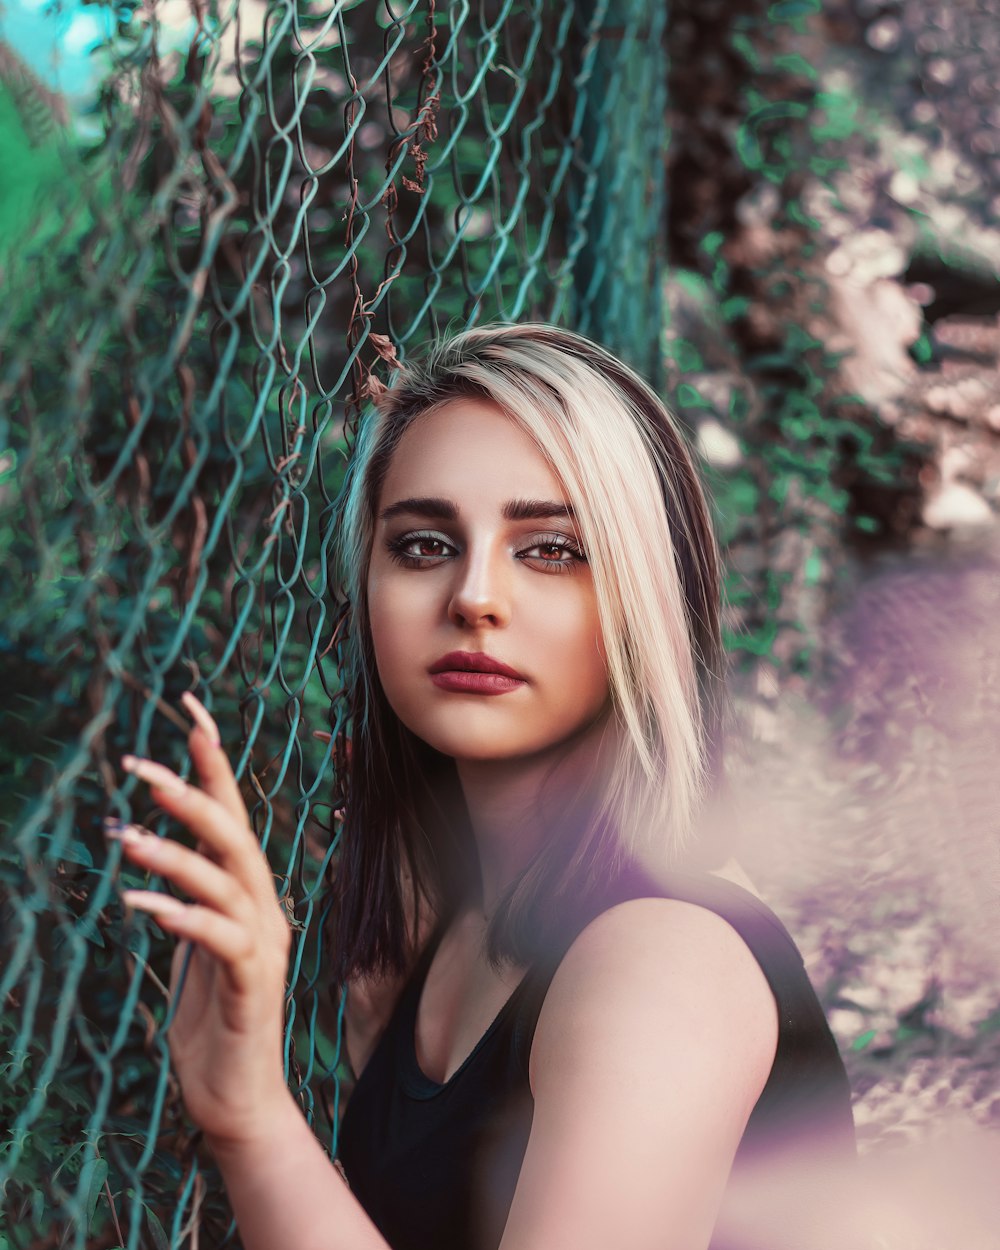 a woman leaning against a chain link fence